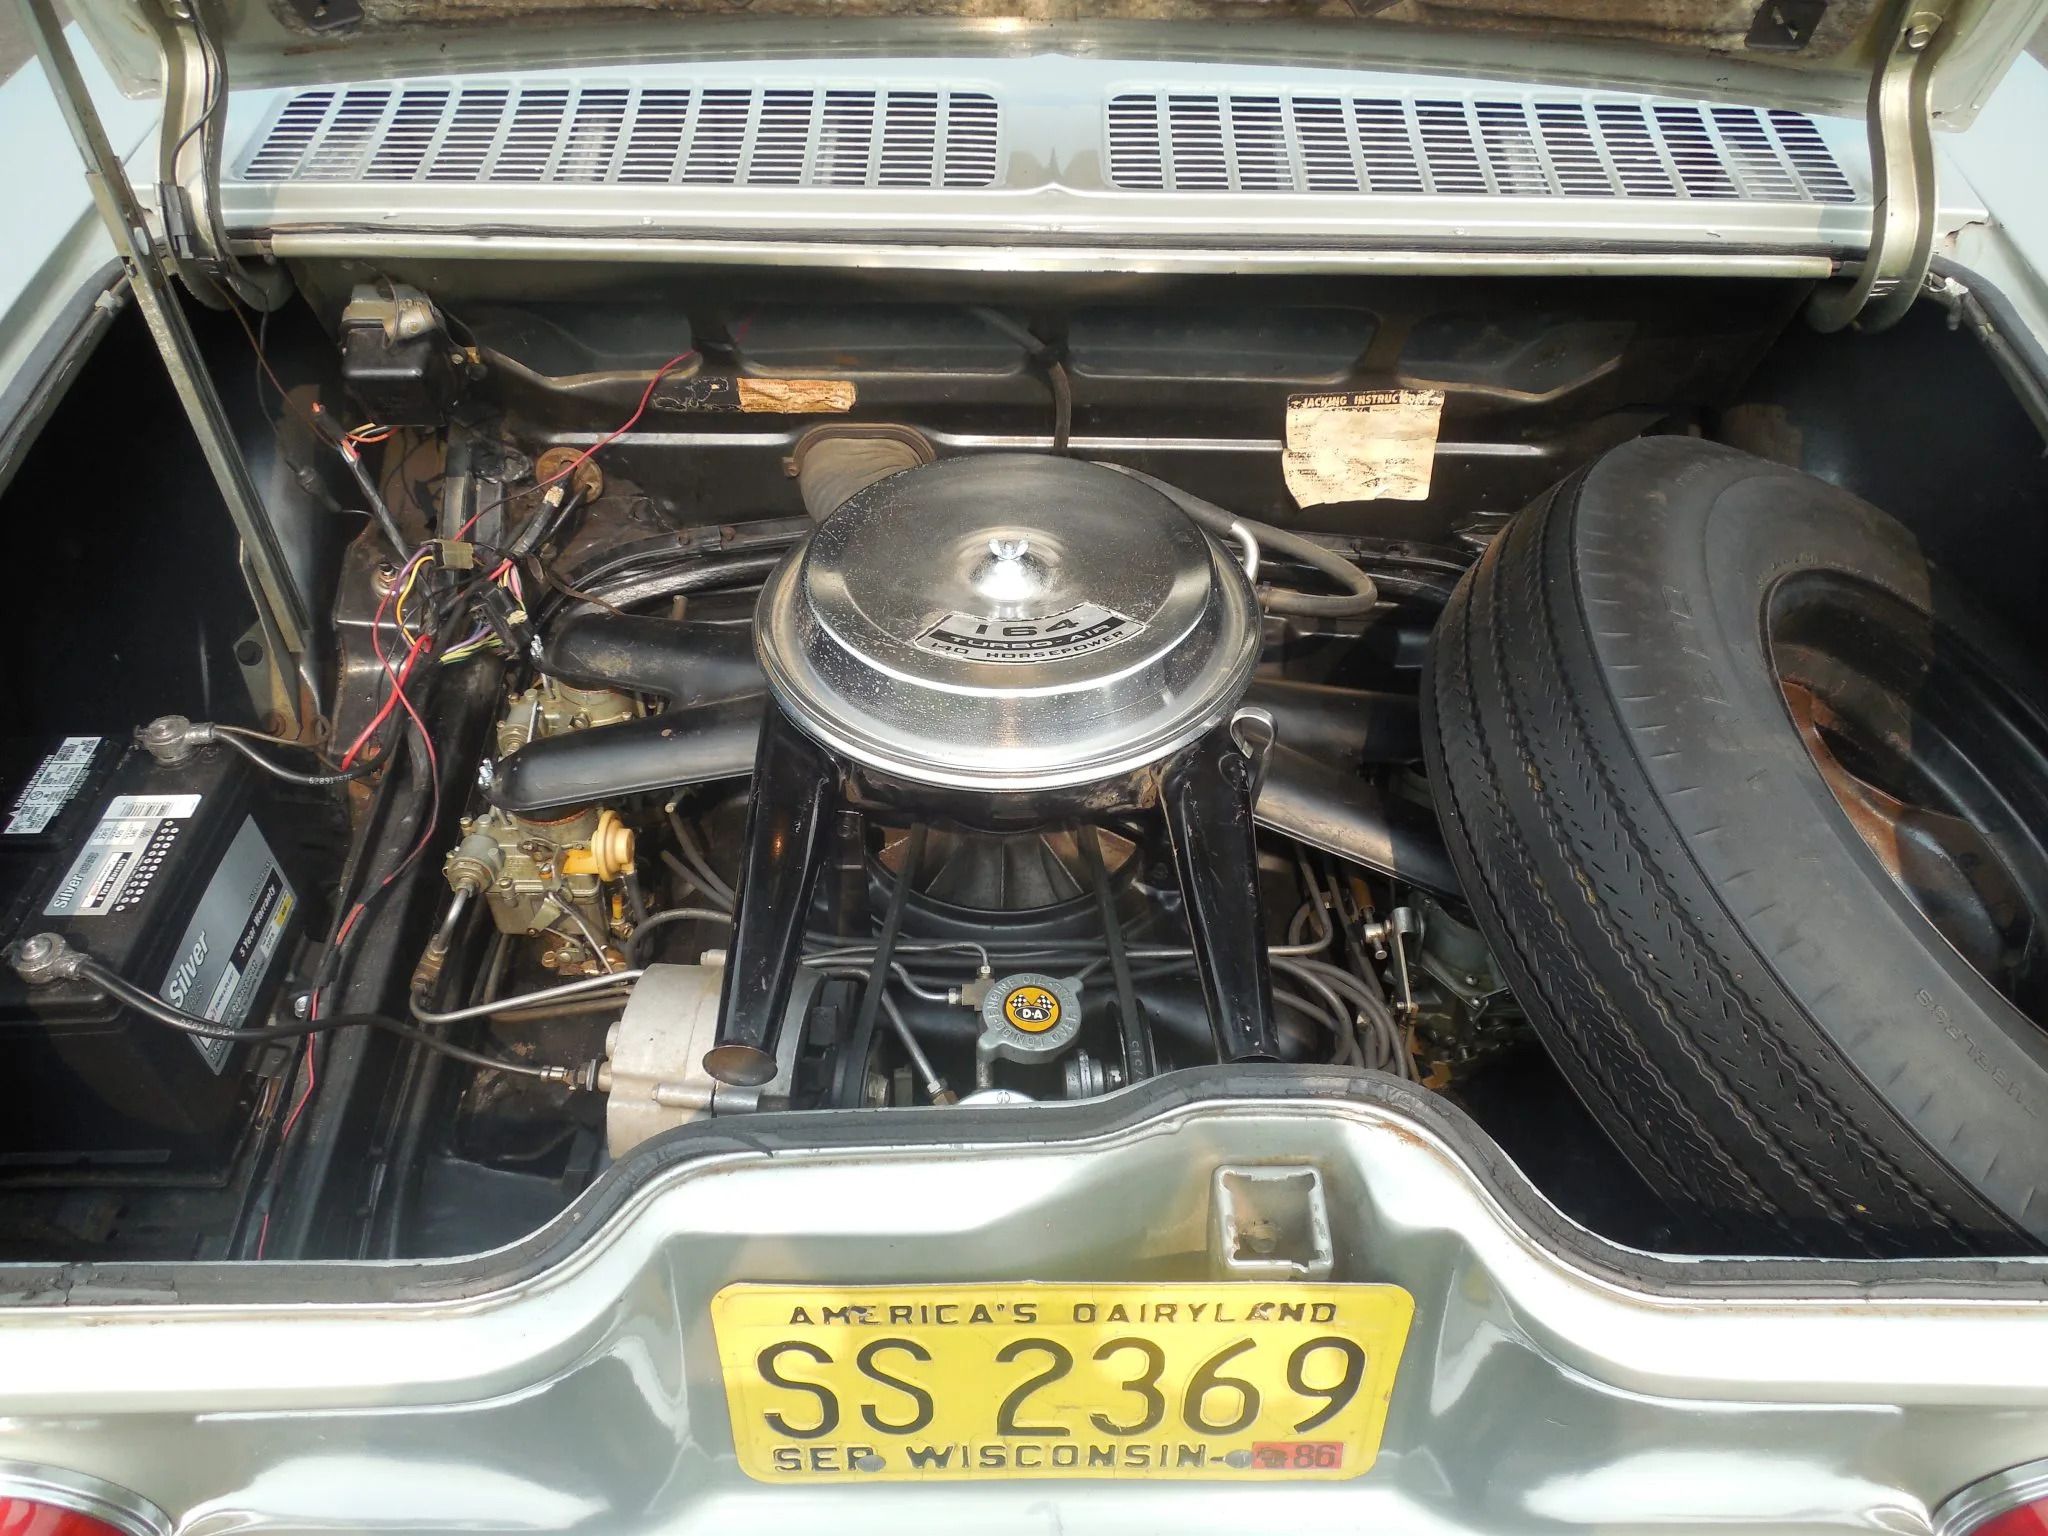 Silver 1960-1964 Chevrolet Corvair (First Generation) engine